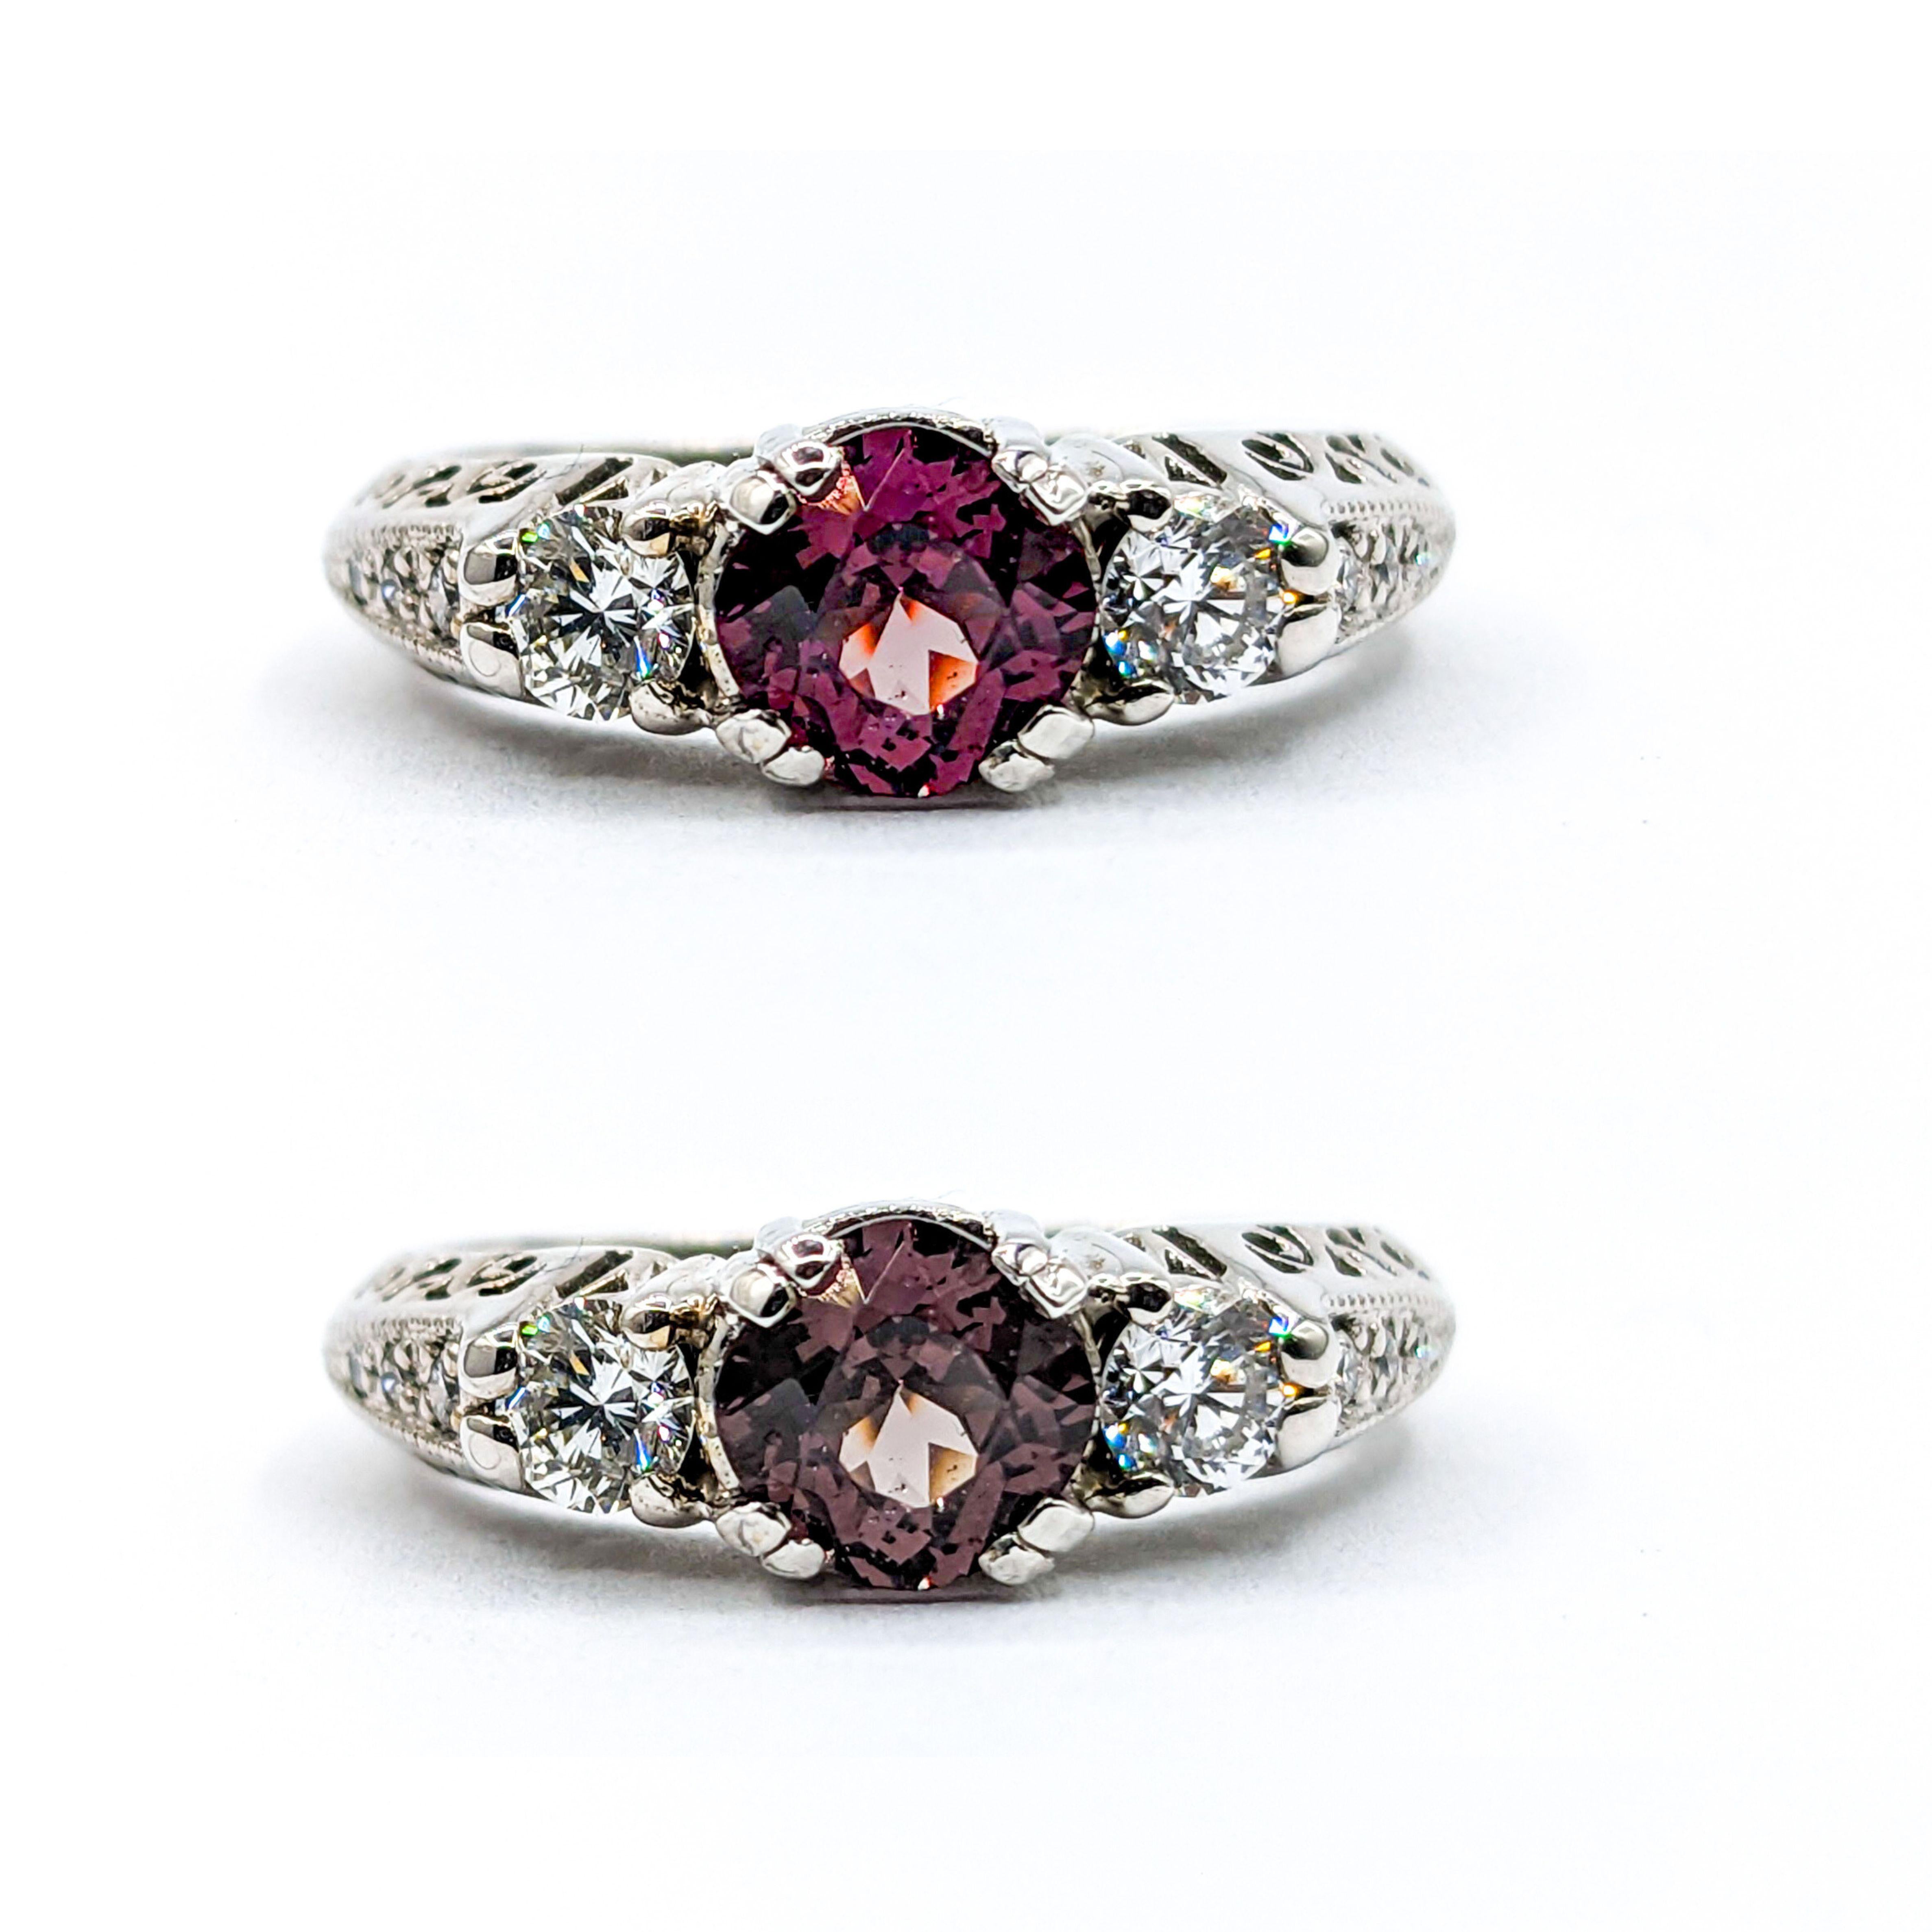 Color Change Garnet & Diamond Filigree Ring in White Gold

This exquisite Garnet ring is expertly crafted in 14-karat white gold with filigree details. The ring showcases a captivating 0.94-carat color-change garnet that fluctuates between a